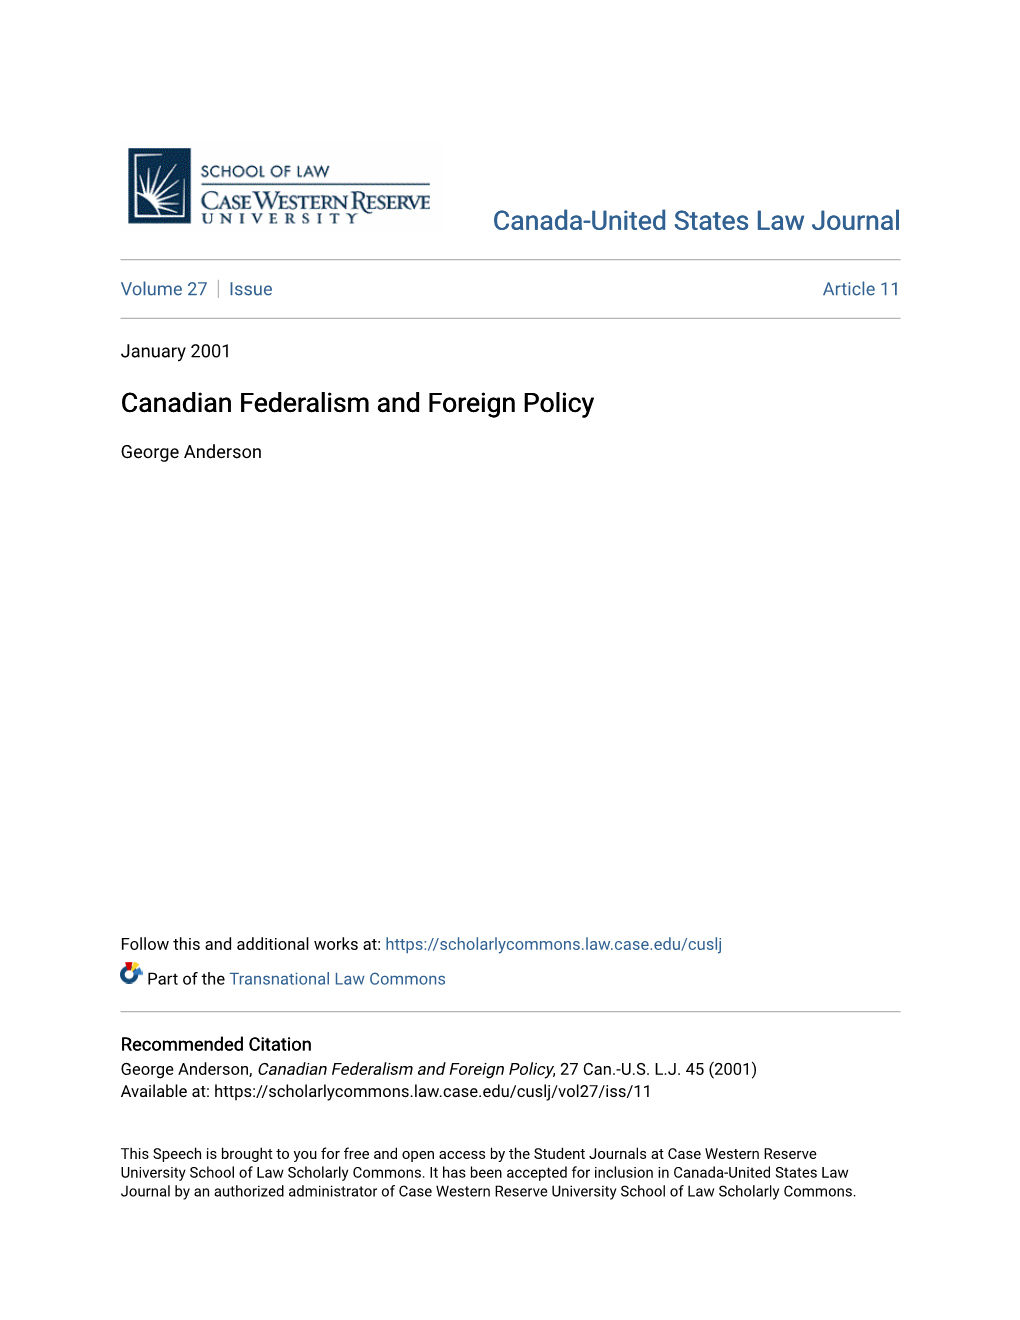 Canadian Federalism and Foreign Policy